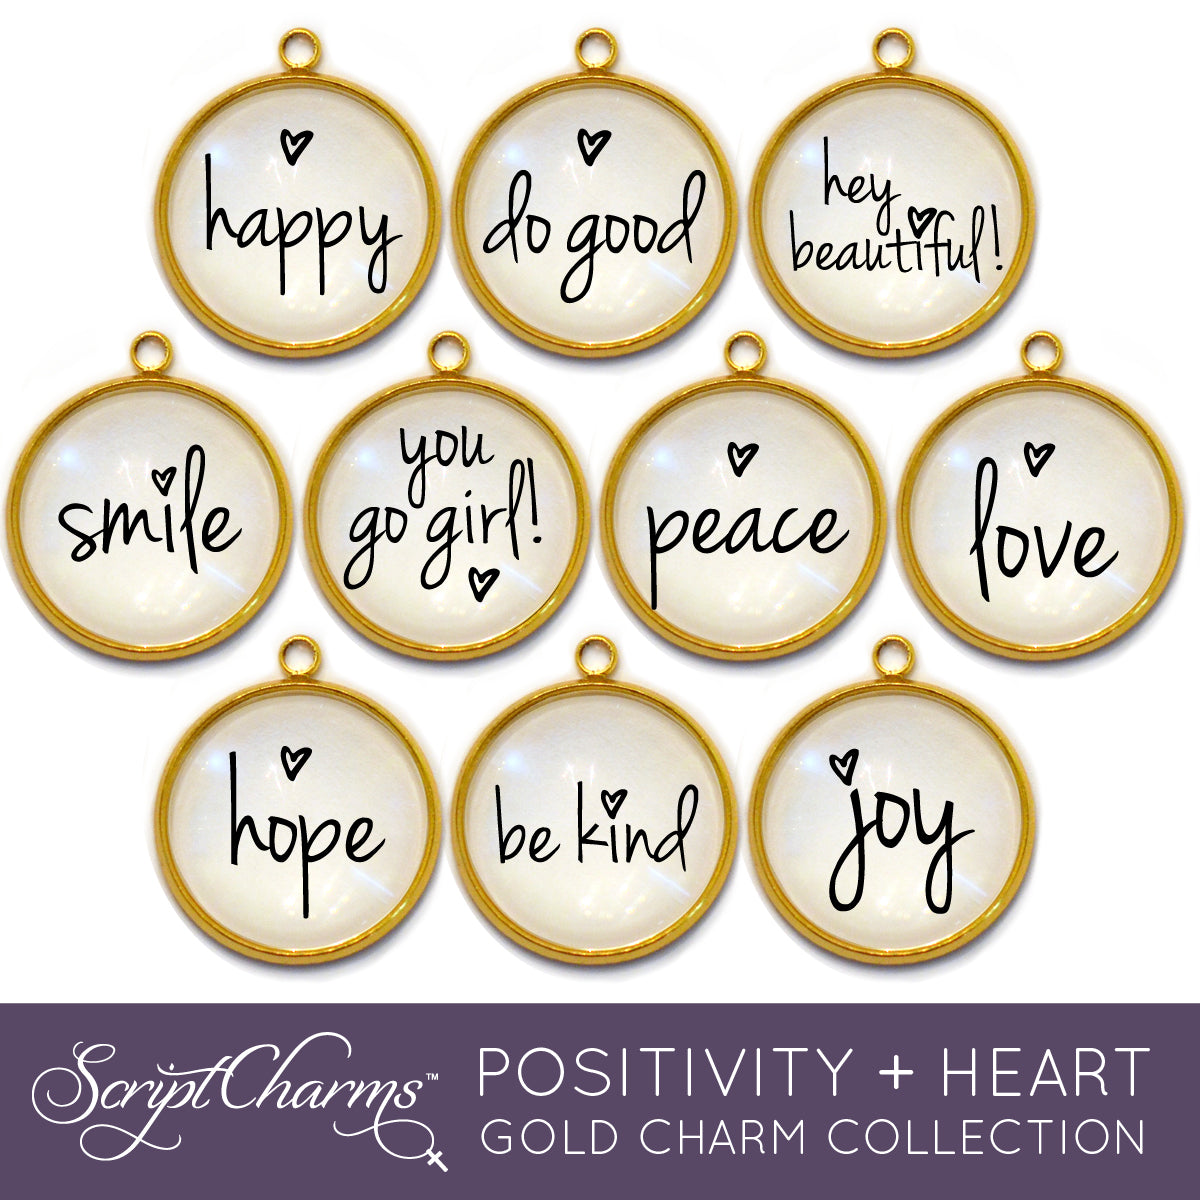 Positivity + Heart Set of 10 Encouraging Charms for Jewelry Making, 20mm, Gold or Silver Gold / 1 Set (10 Charms)